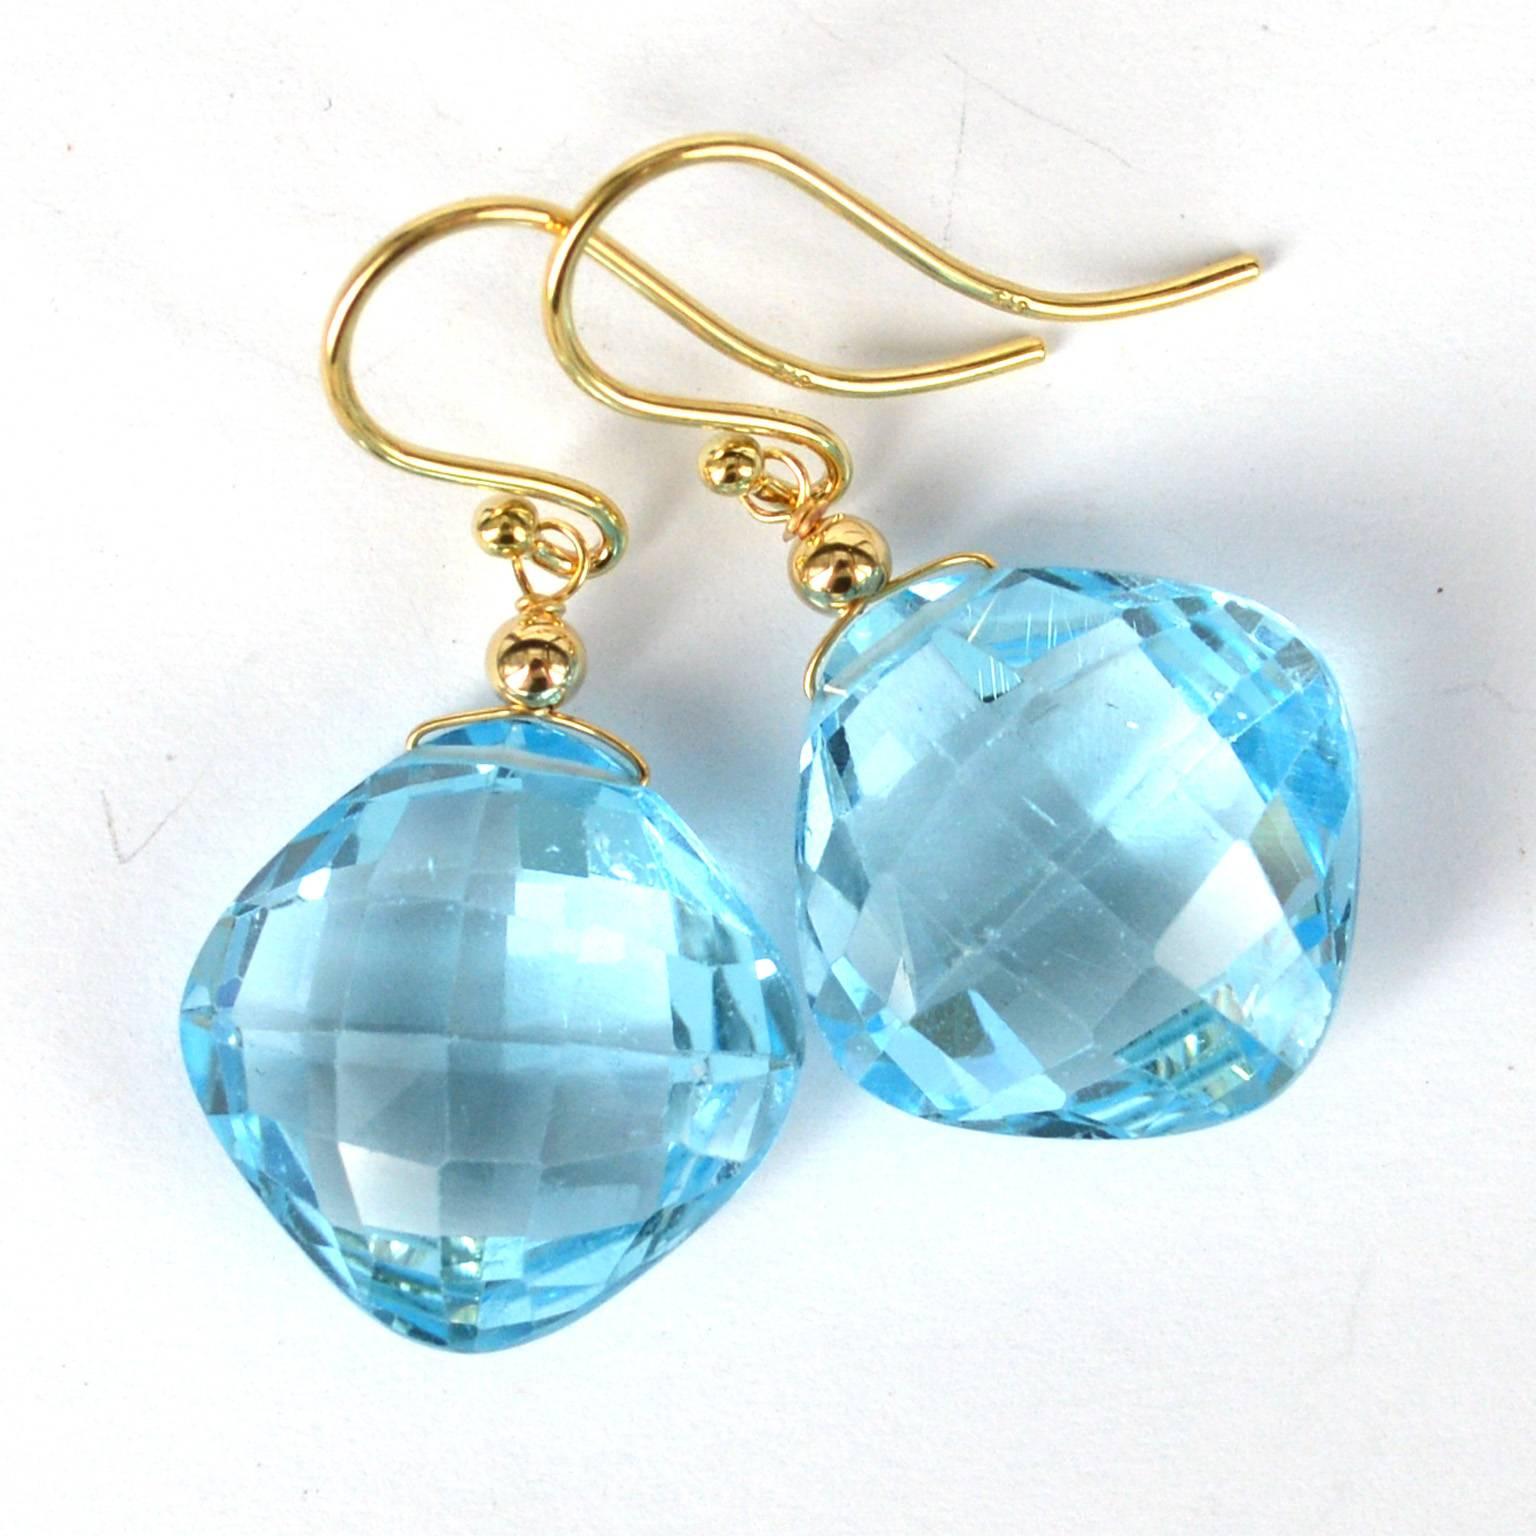 Vibrant Blue Topaz with checker board cut on the front and back sides, stones measure 16mm across when measured as a square. 14k Gold ear wires, beads and wire.
Total length of earrings is 35mm
